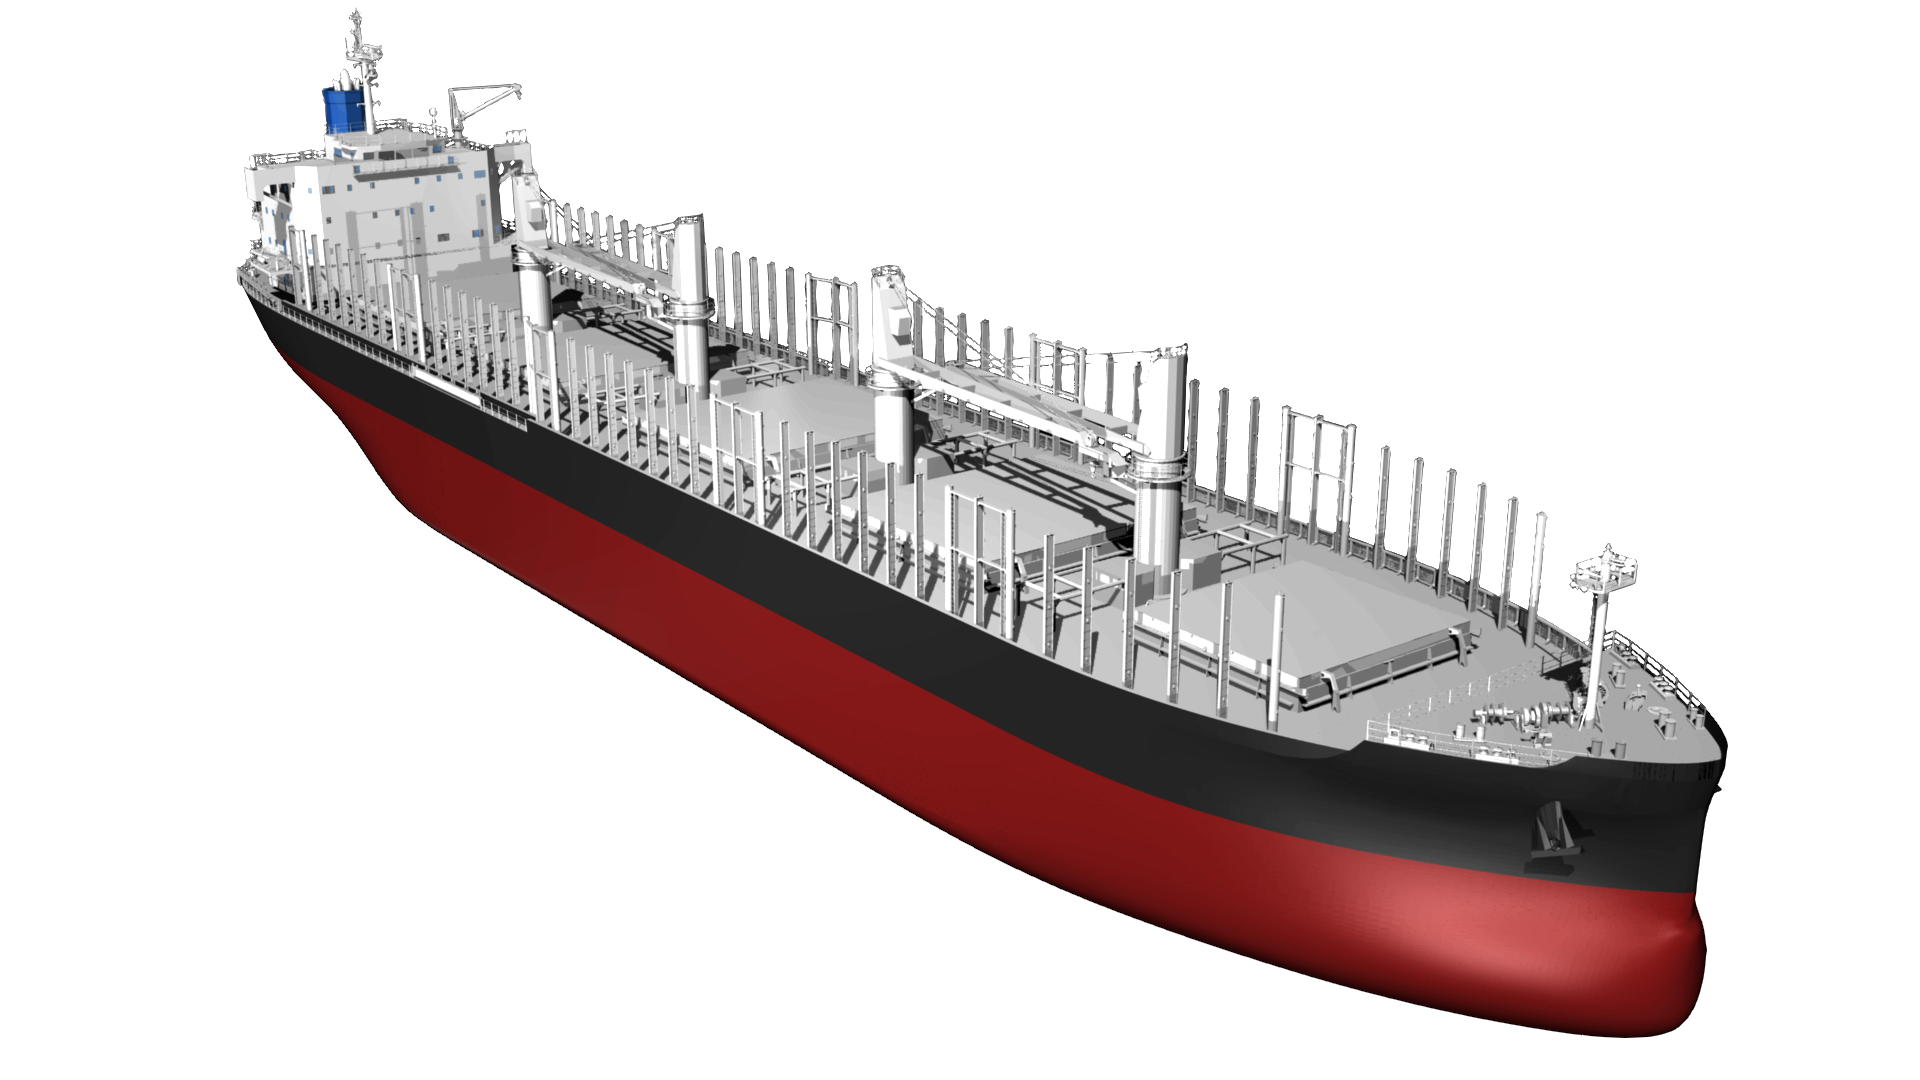 Vessel Cargo Free HD Image PNG Image